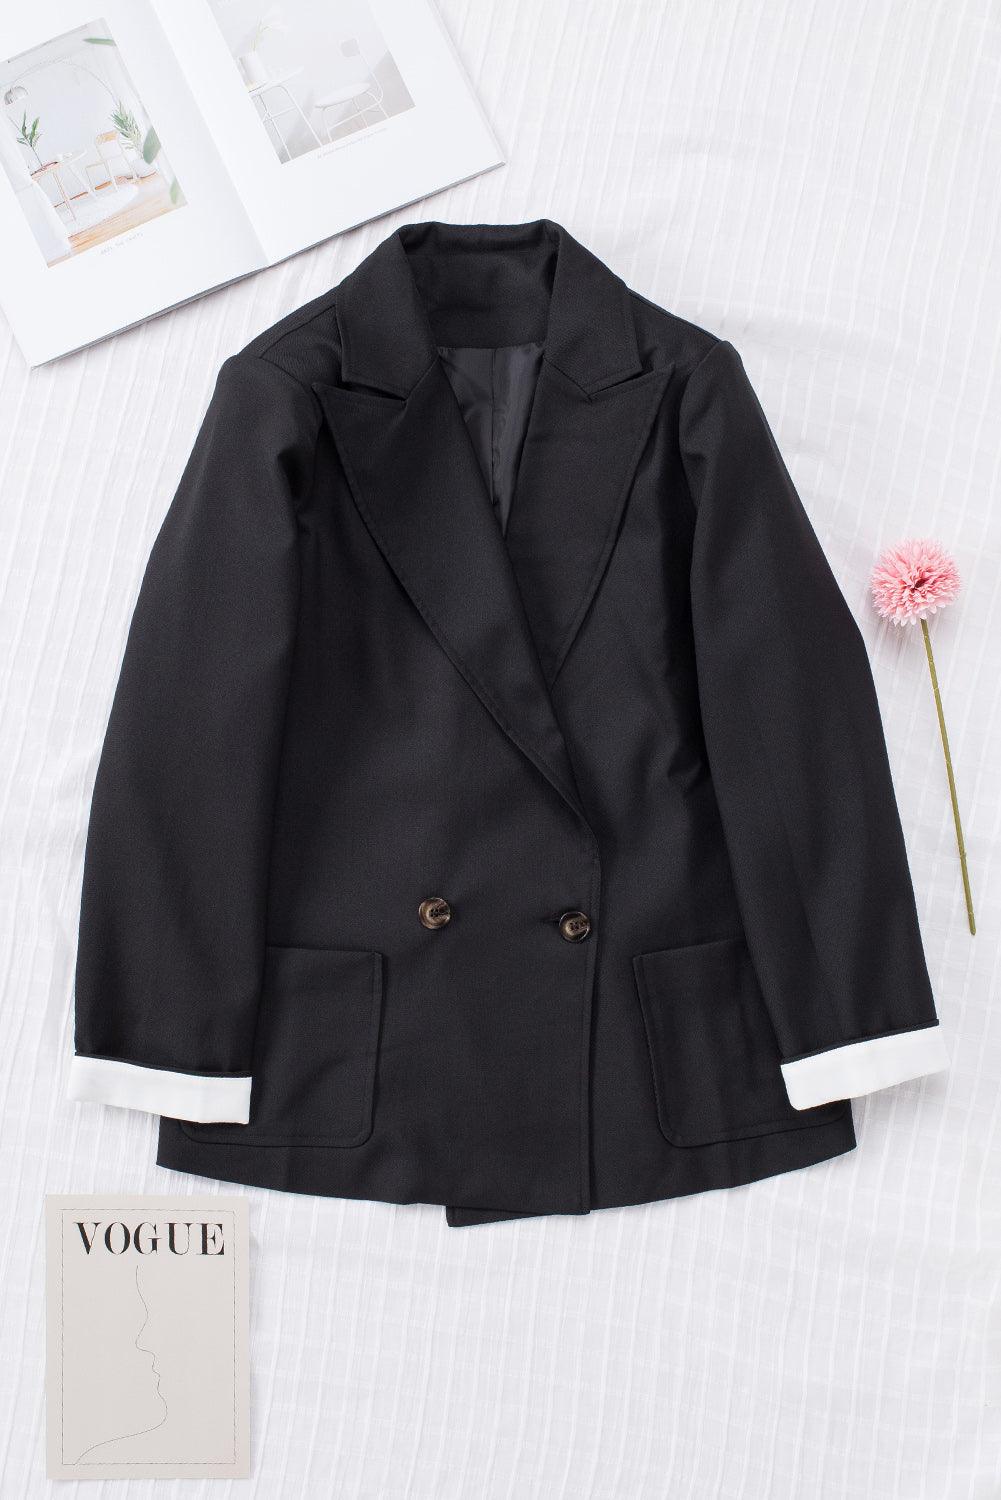 Double-Breasted Blazer with Pockets - York & Dante LLC